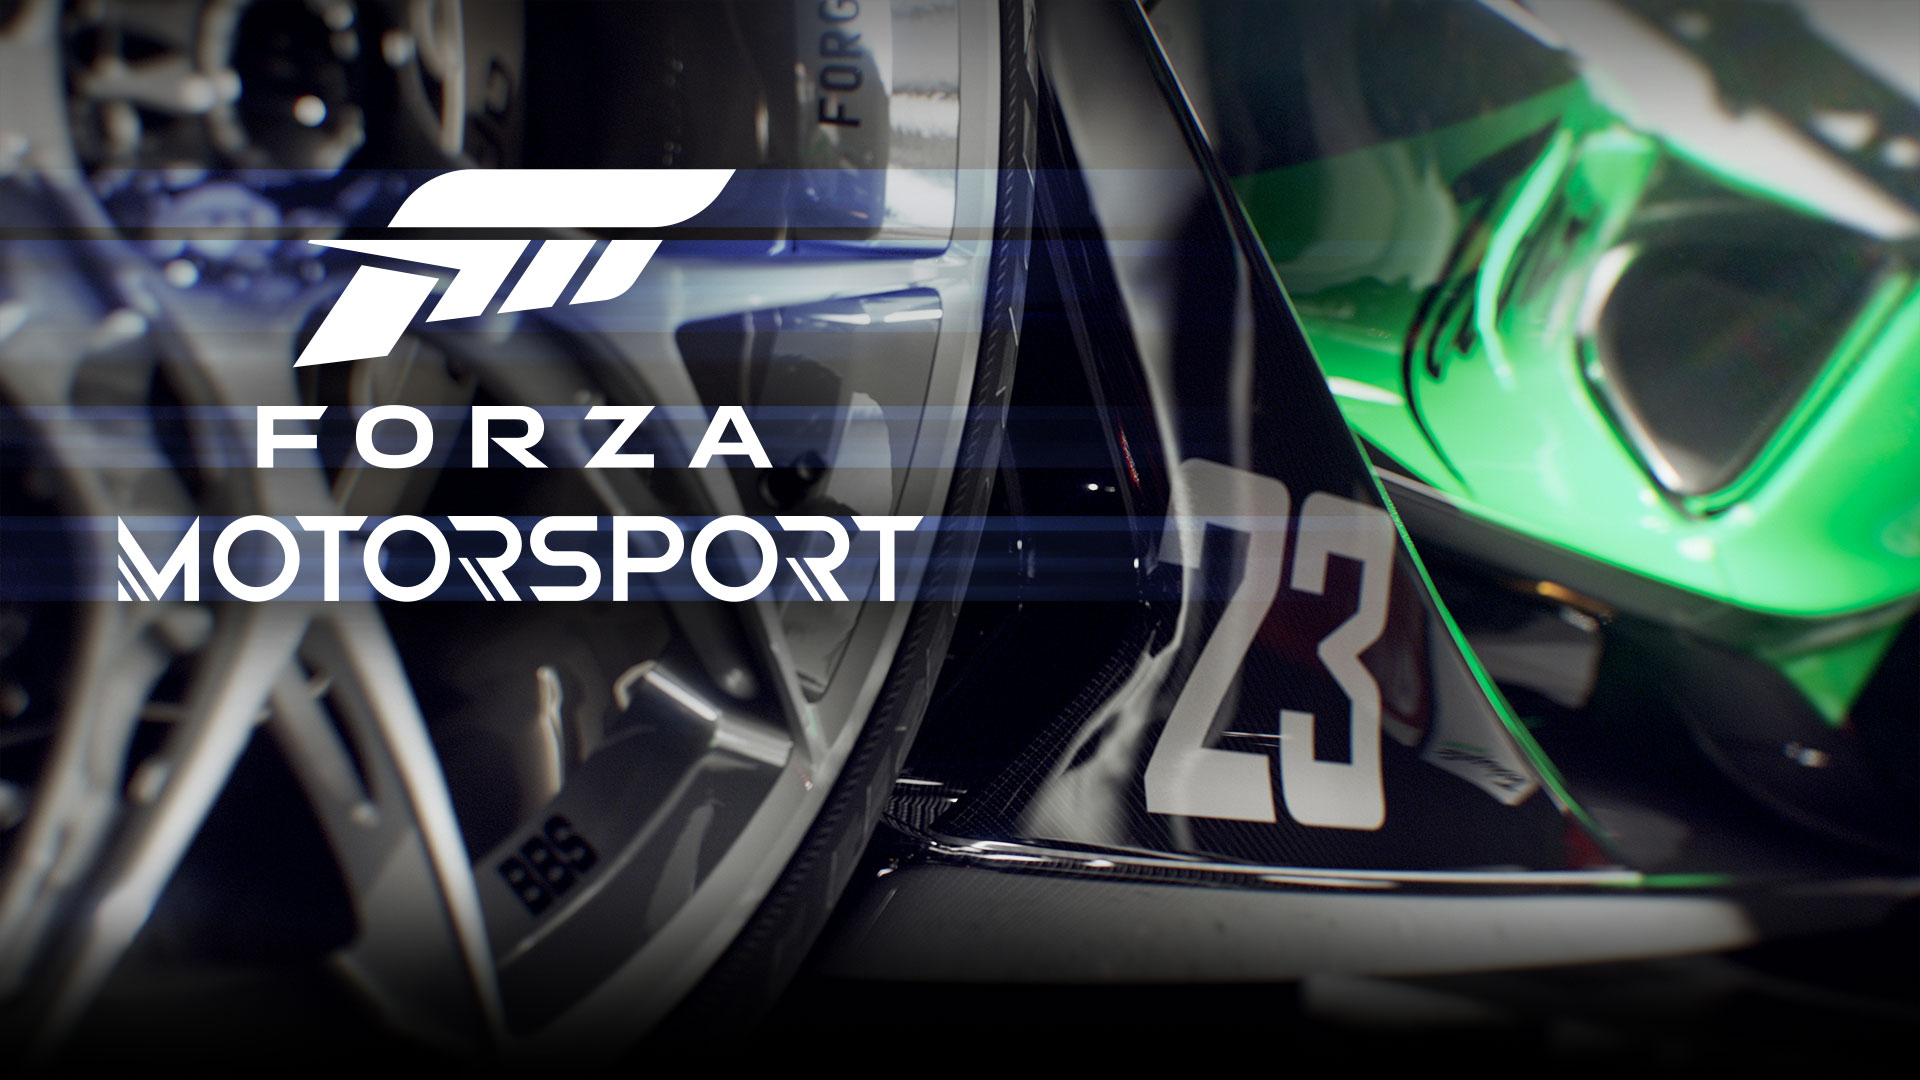 Forza Motorsport Reboot May Launch In October, Says Insider